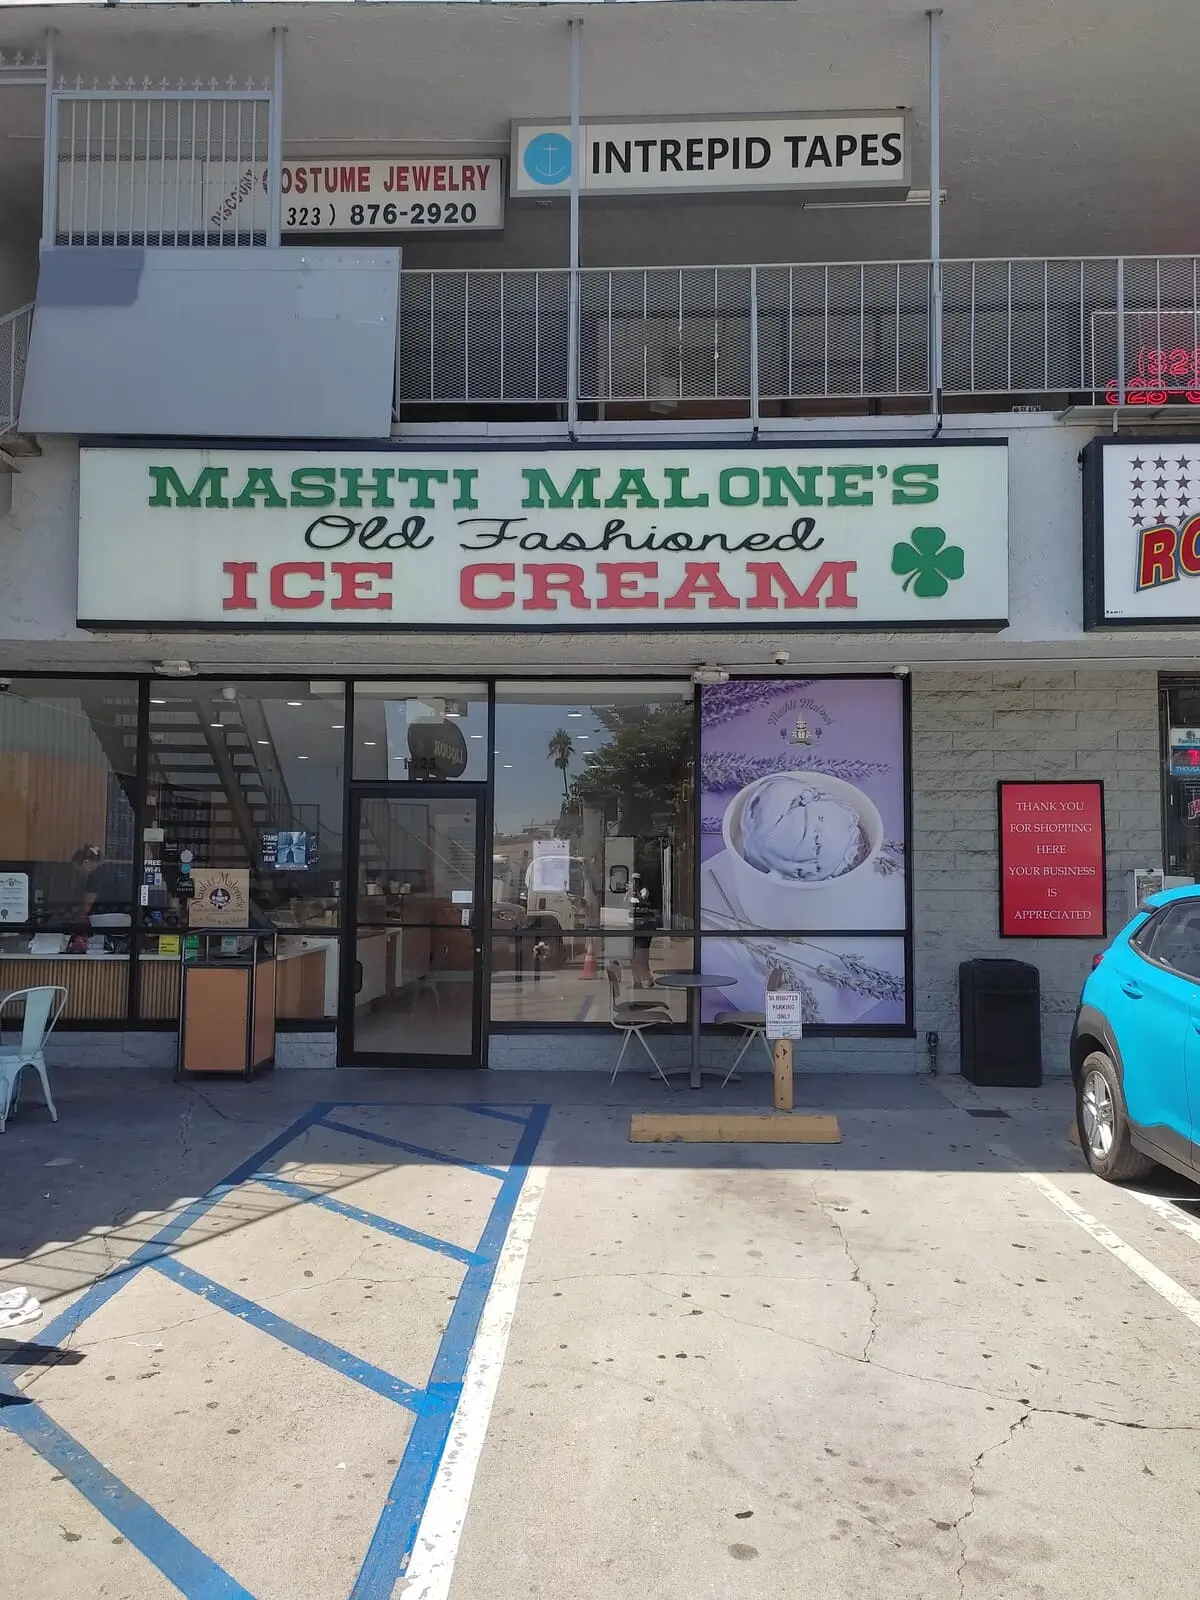 Entrance to Mashti Malone's Old-fashioned ice cream at a strip mall. There are a couple of tables with chairs outside, next to the parking lot